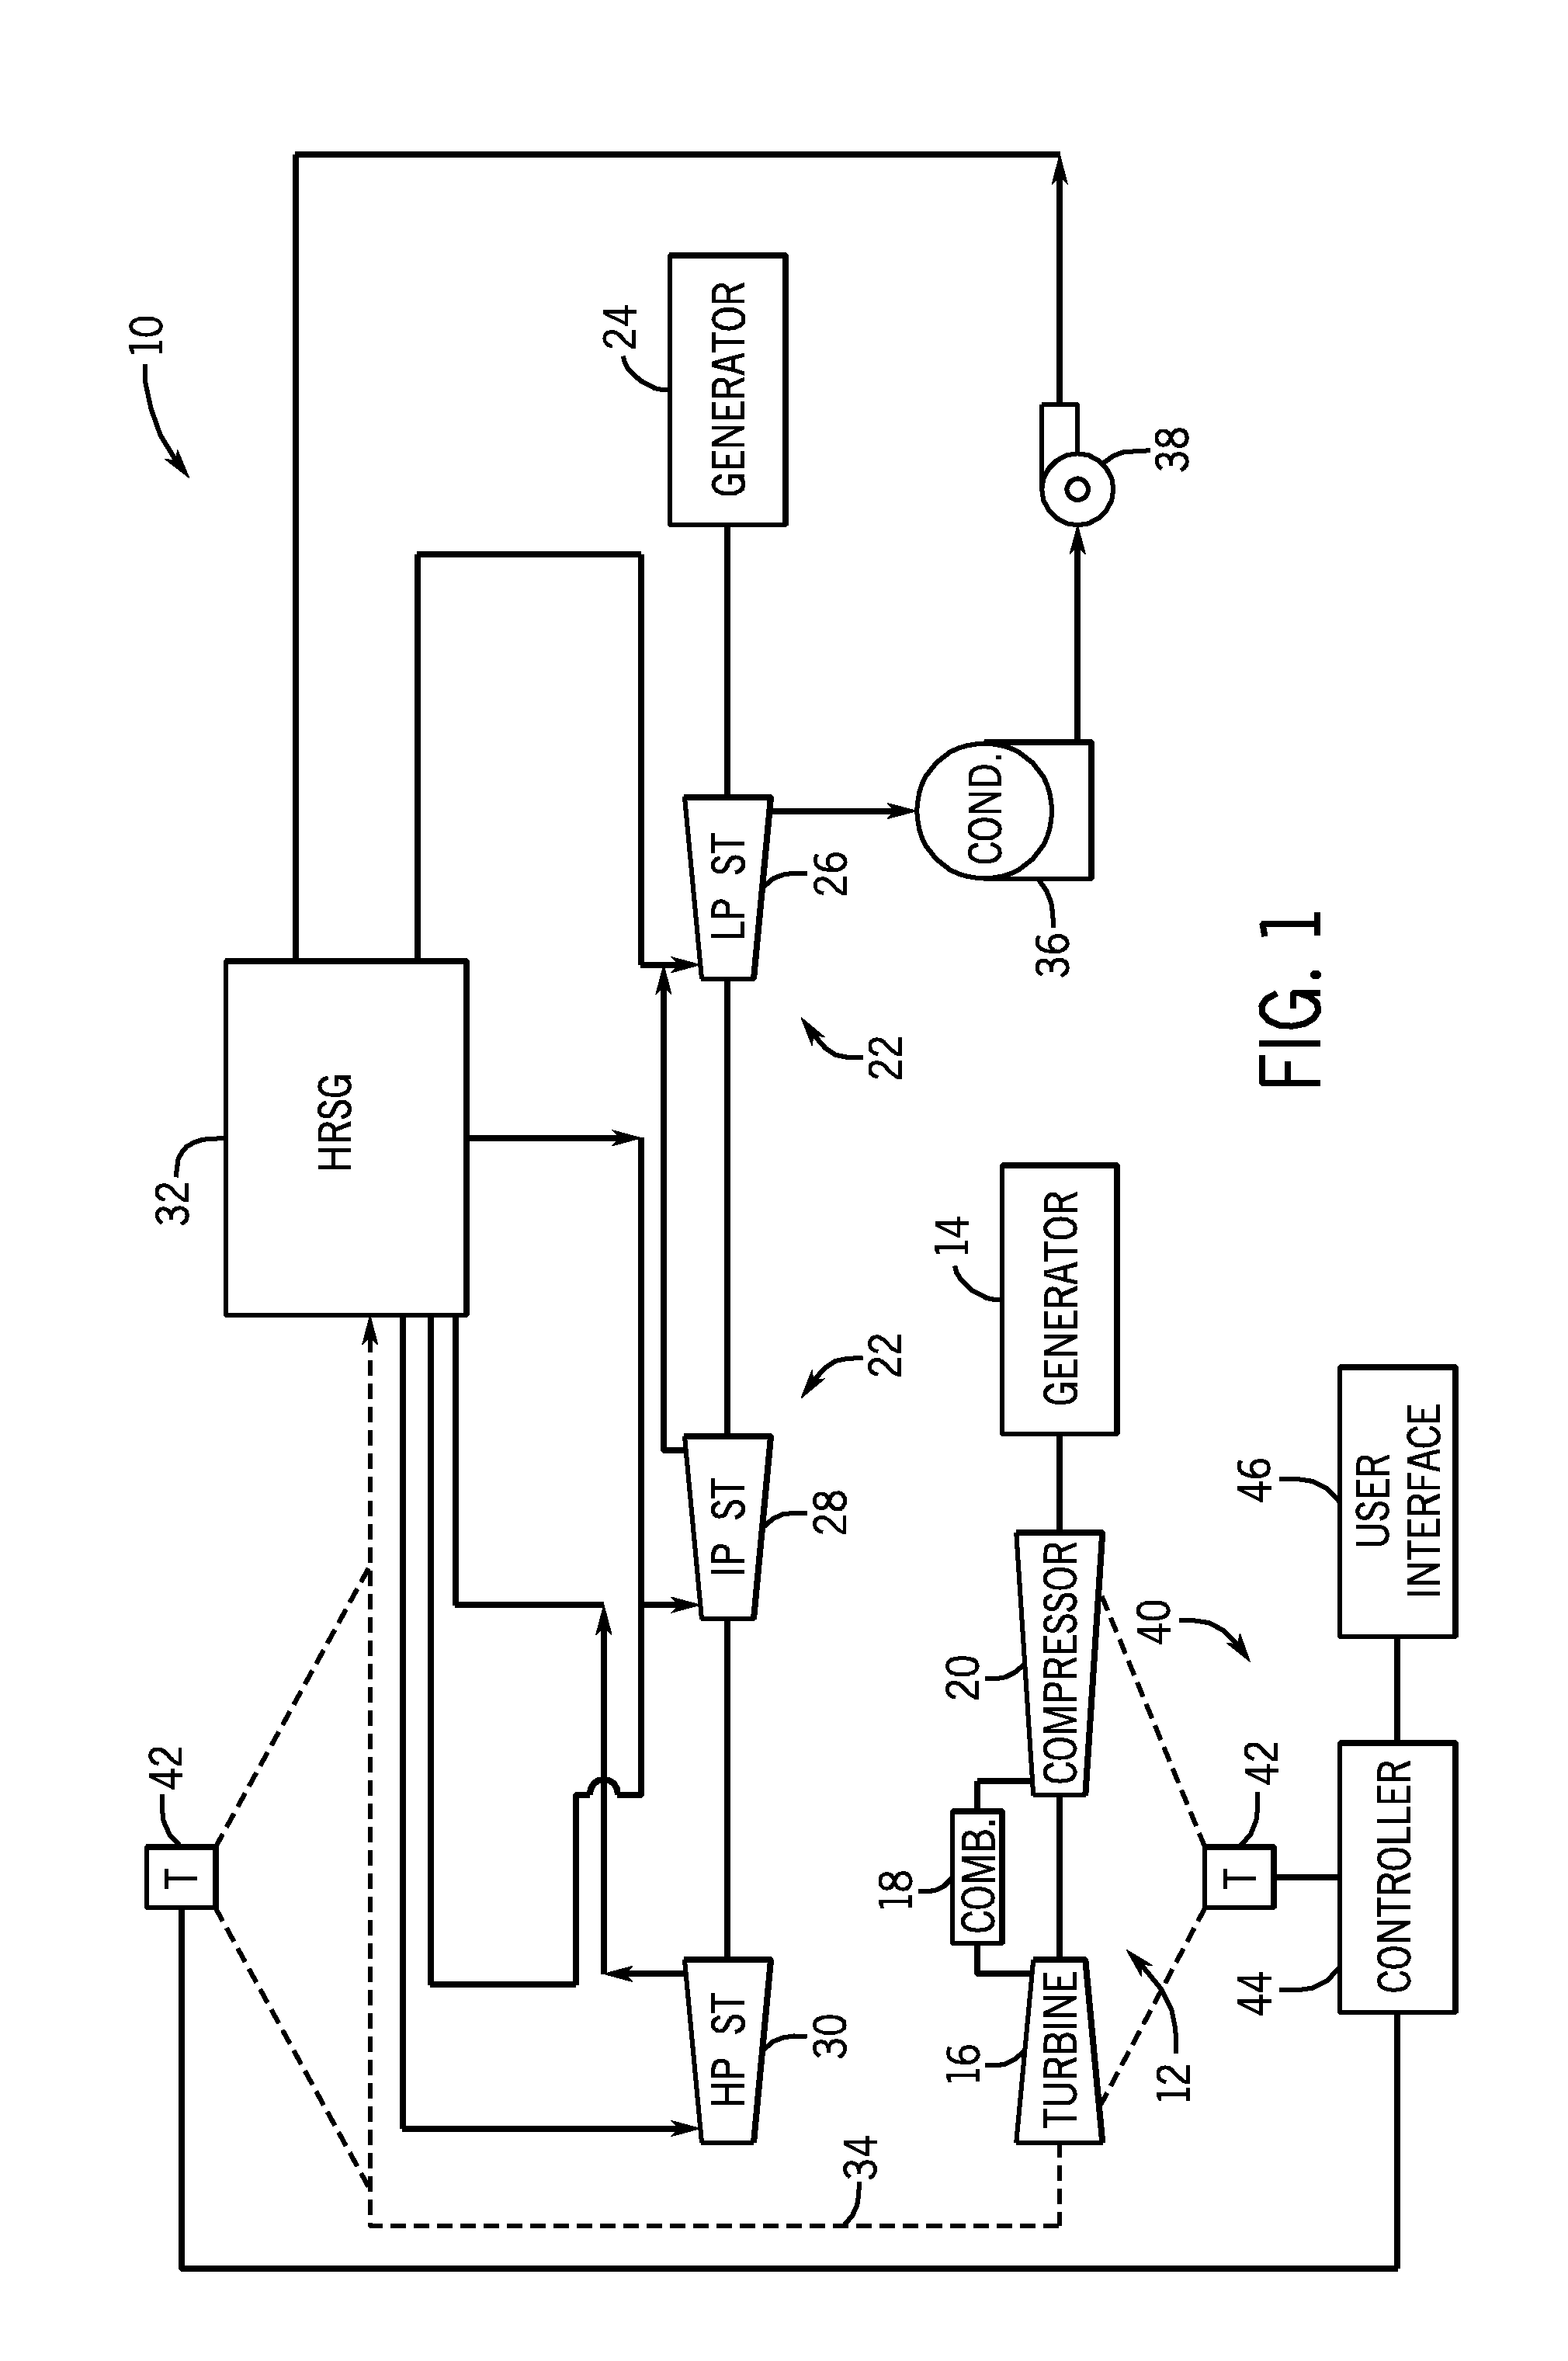 Thermal measurement system and method for leak detection